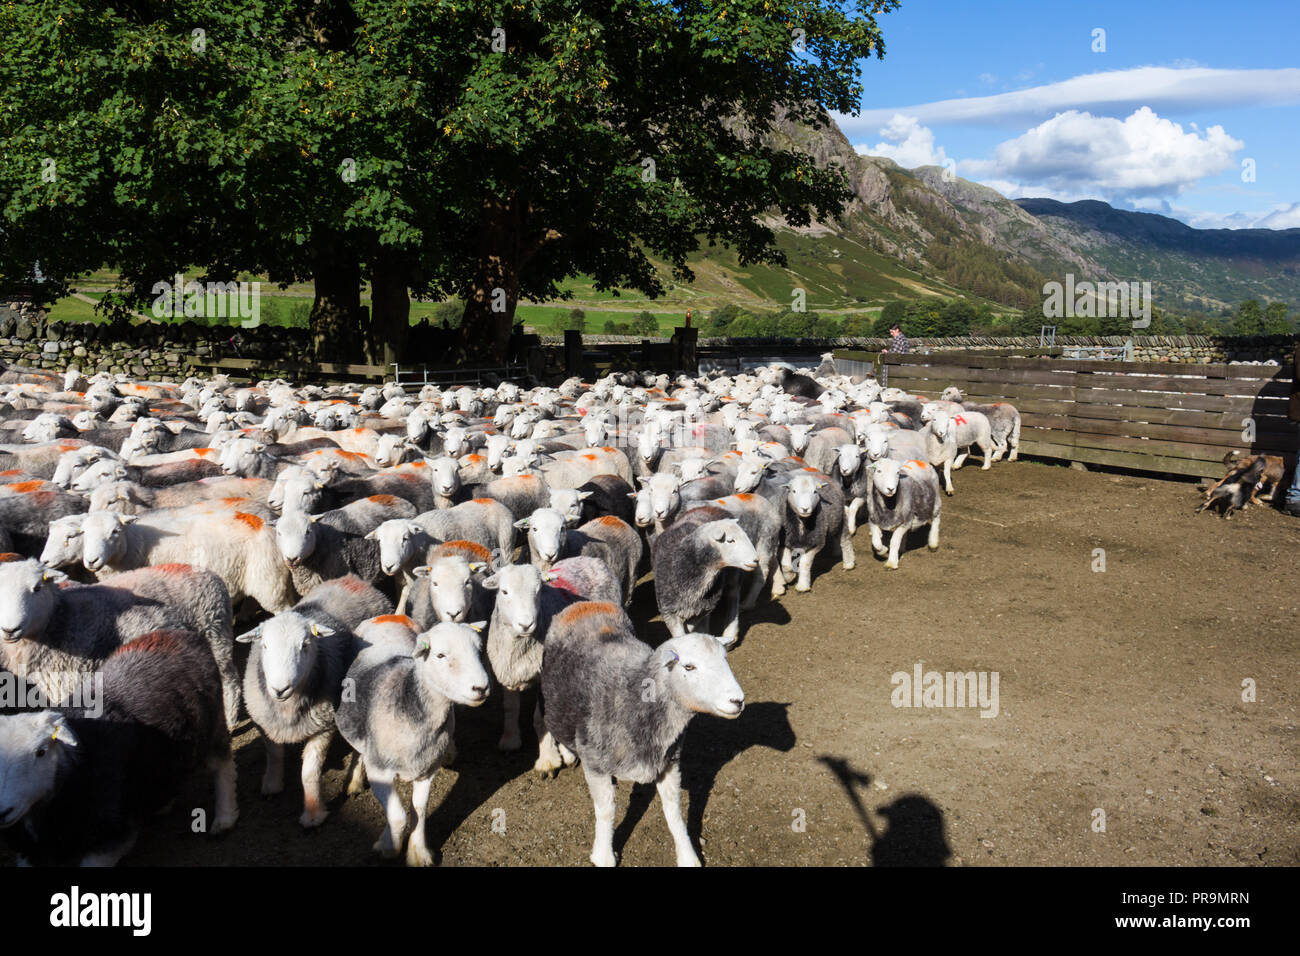 Herdwick sheep, native sheep to the Lake District, in Great Langdale, Lake District, Cumbria, England. Stock Photo